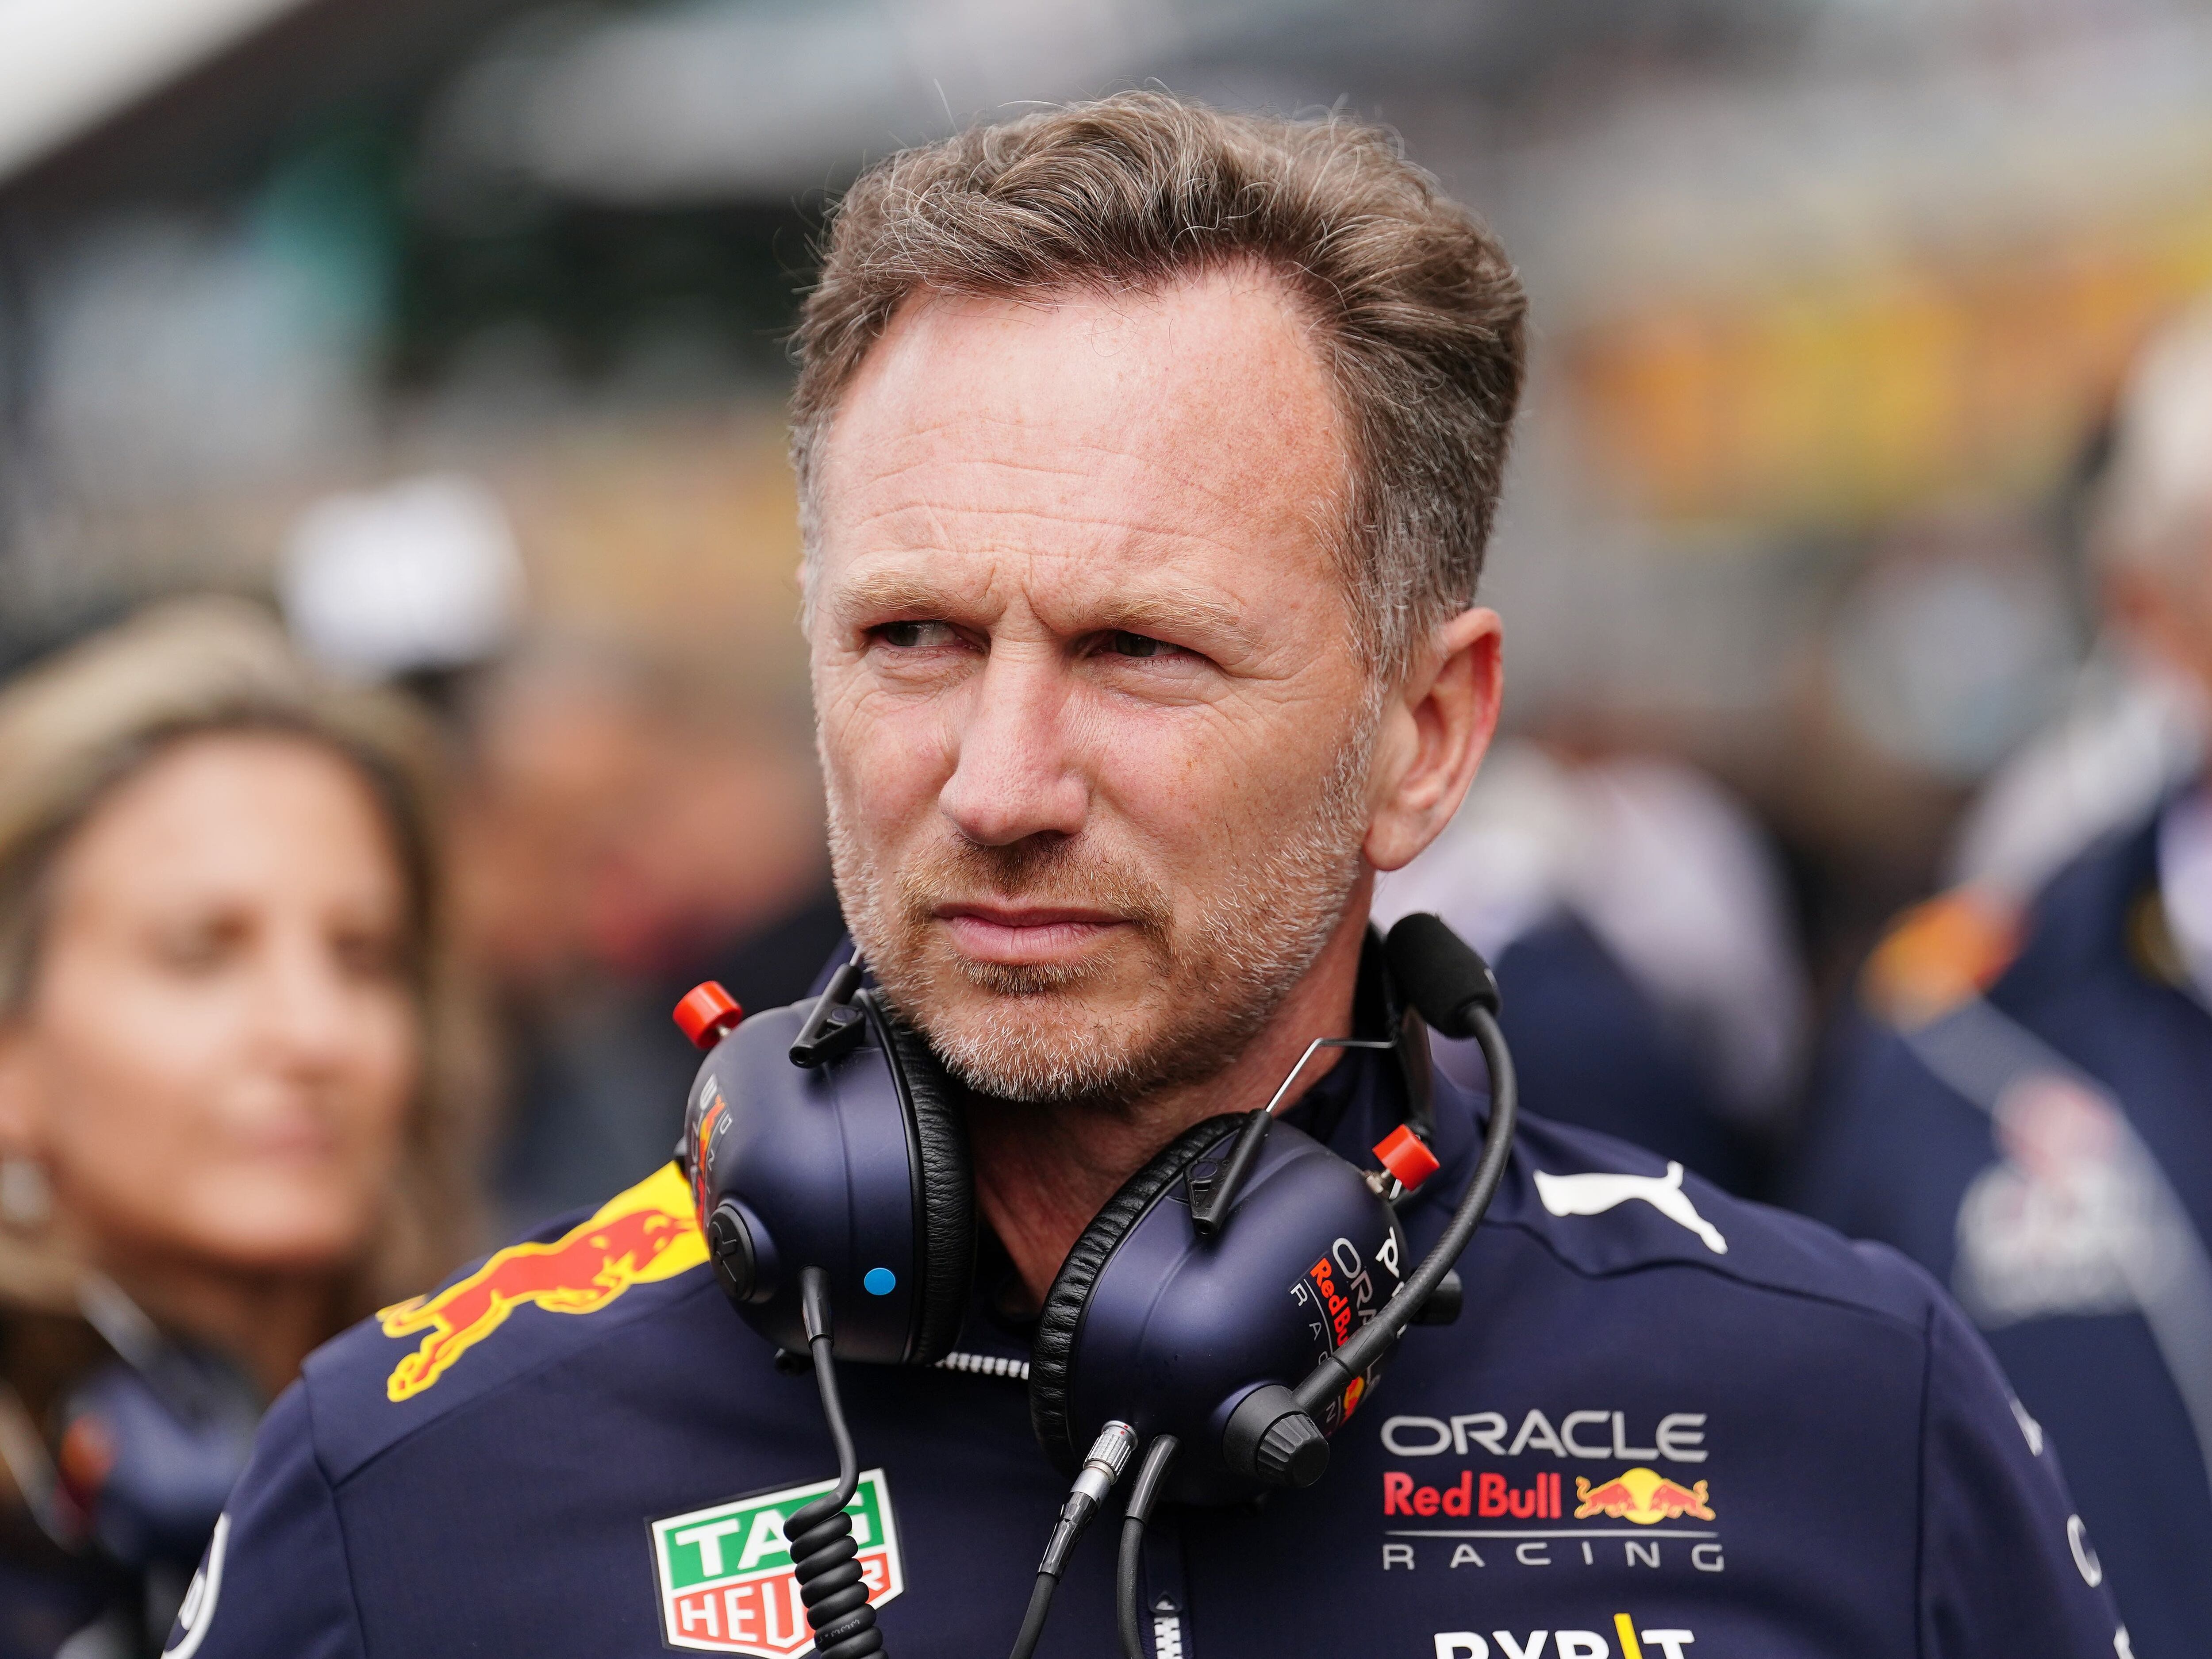 Christian Horner threatens legal action over ‘fictitious claims’ from Toto Wolff